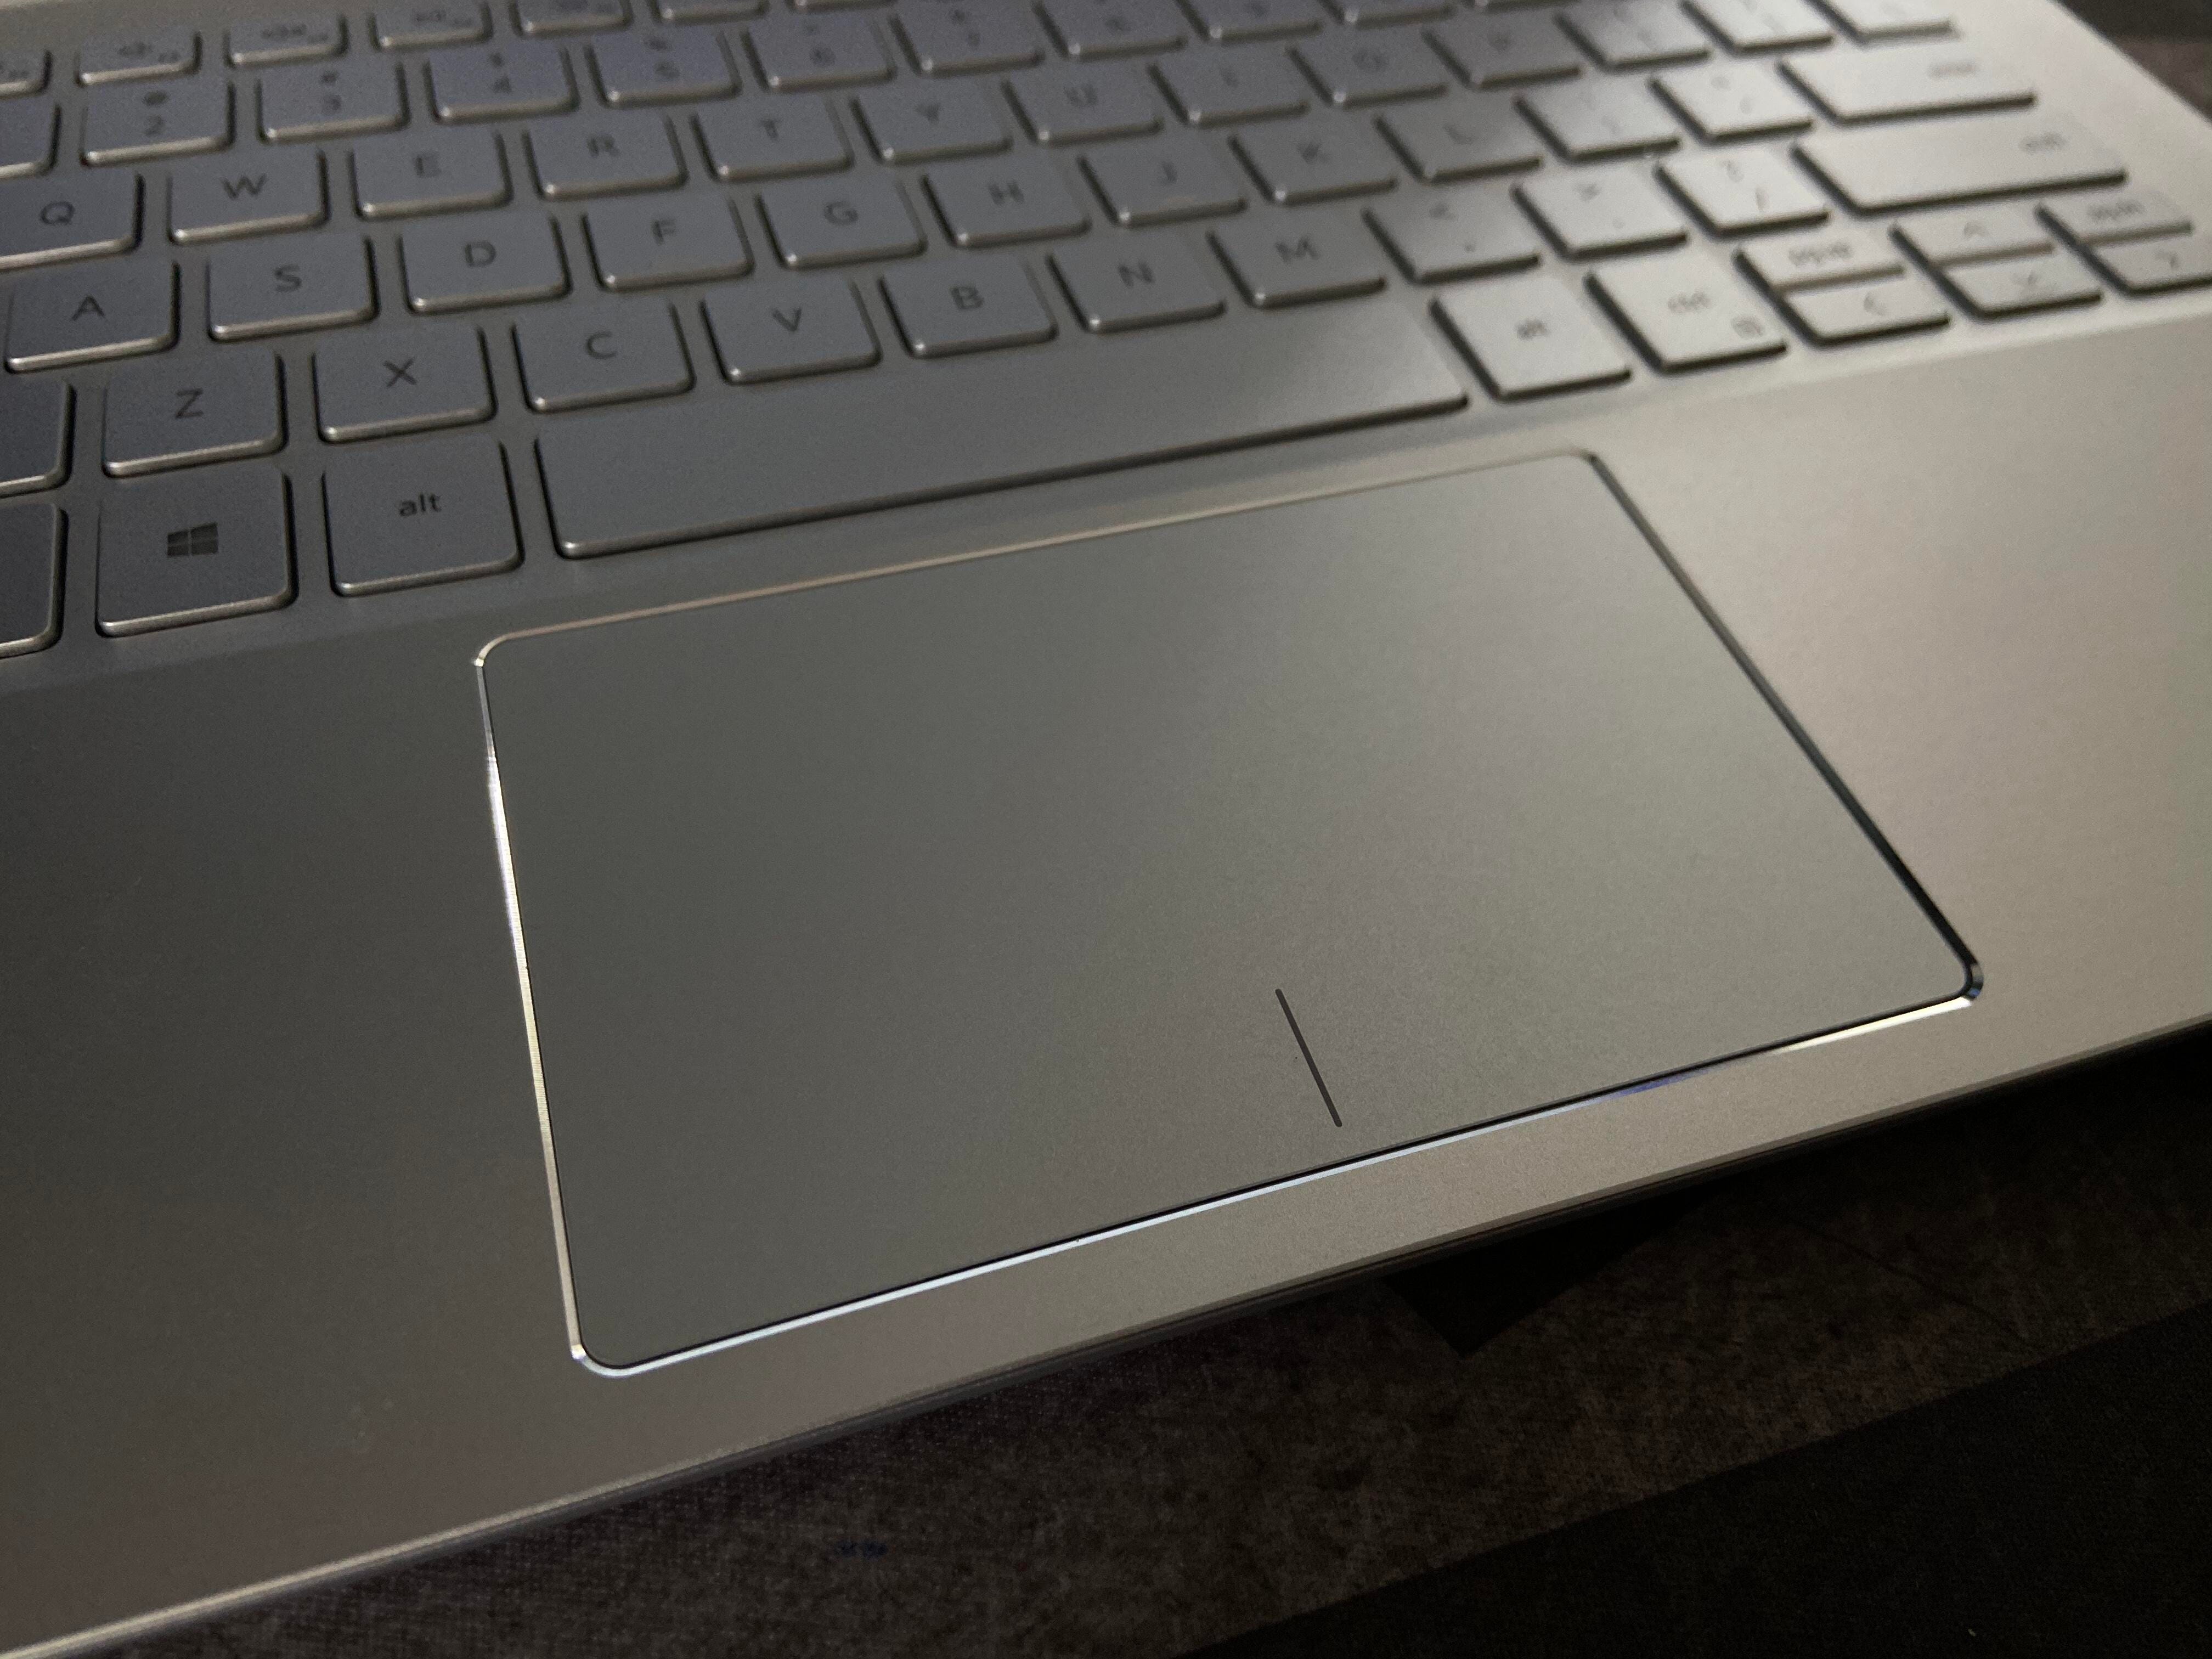 Touchpad not working on your Windows 10 laptop? Here’s how to fix it